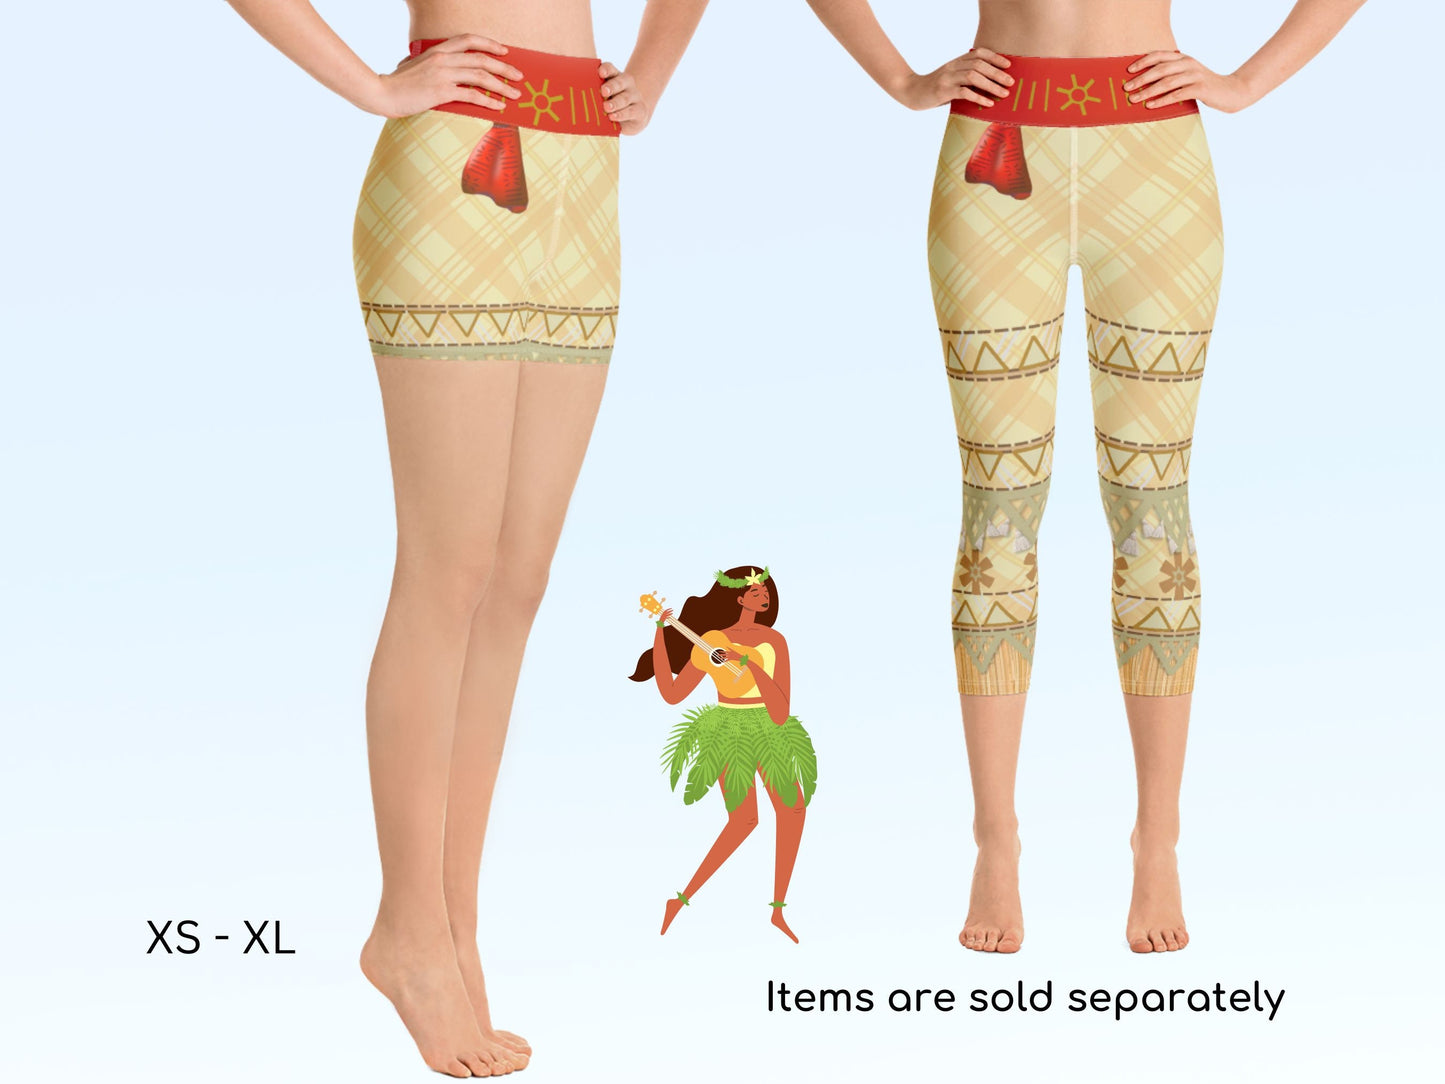 Moana Inspired Skater Dress Yoga Capris & Shorts Running Costume Athletic Activewear Princess Halloween Cosplay Gift for Her Birthday Gift